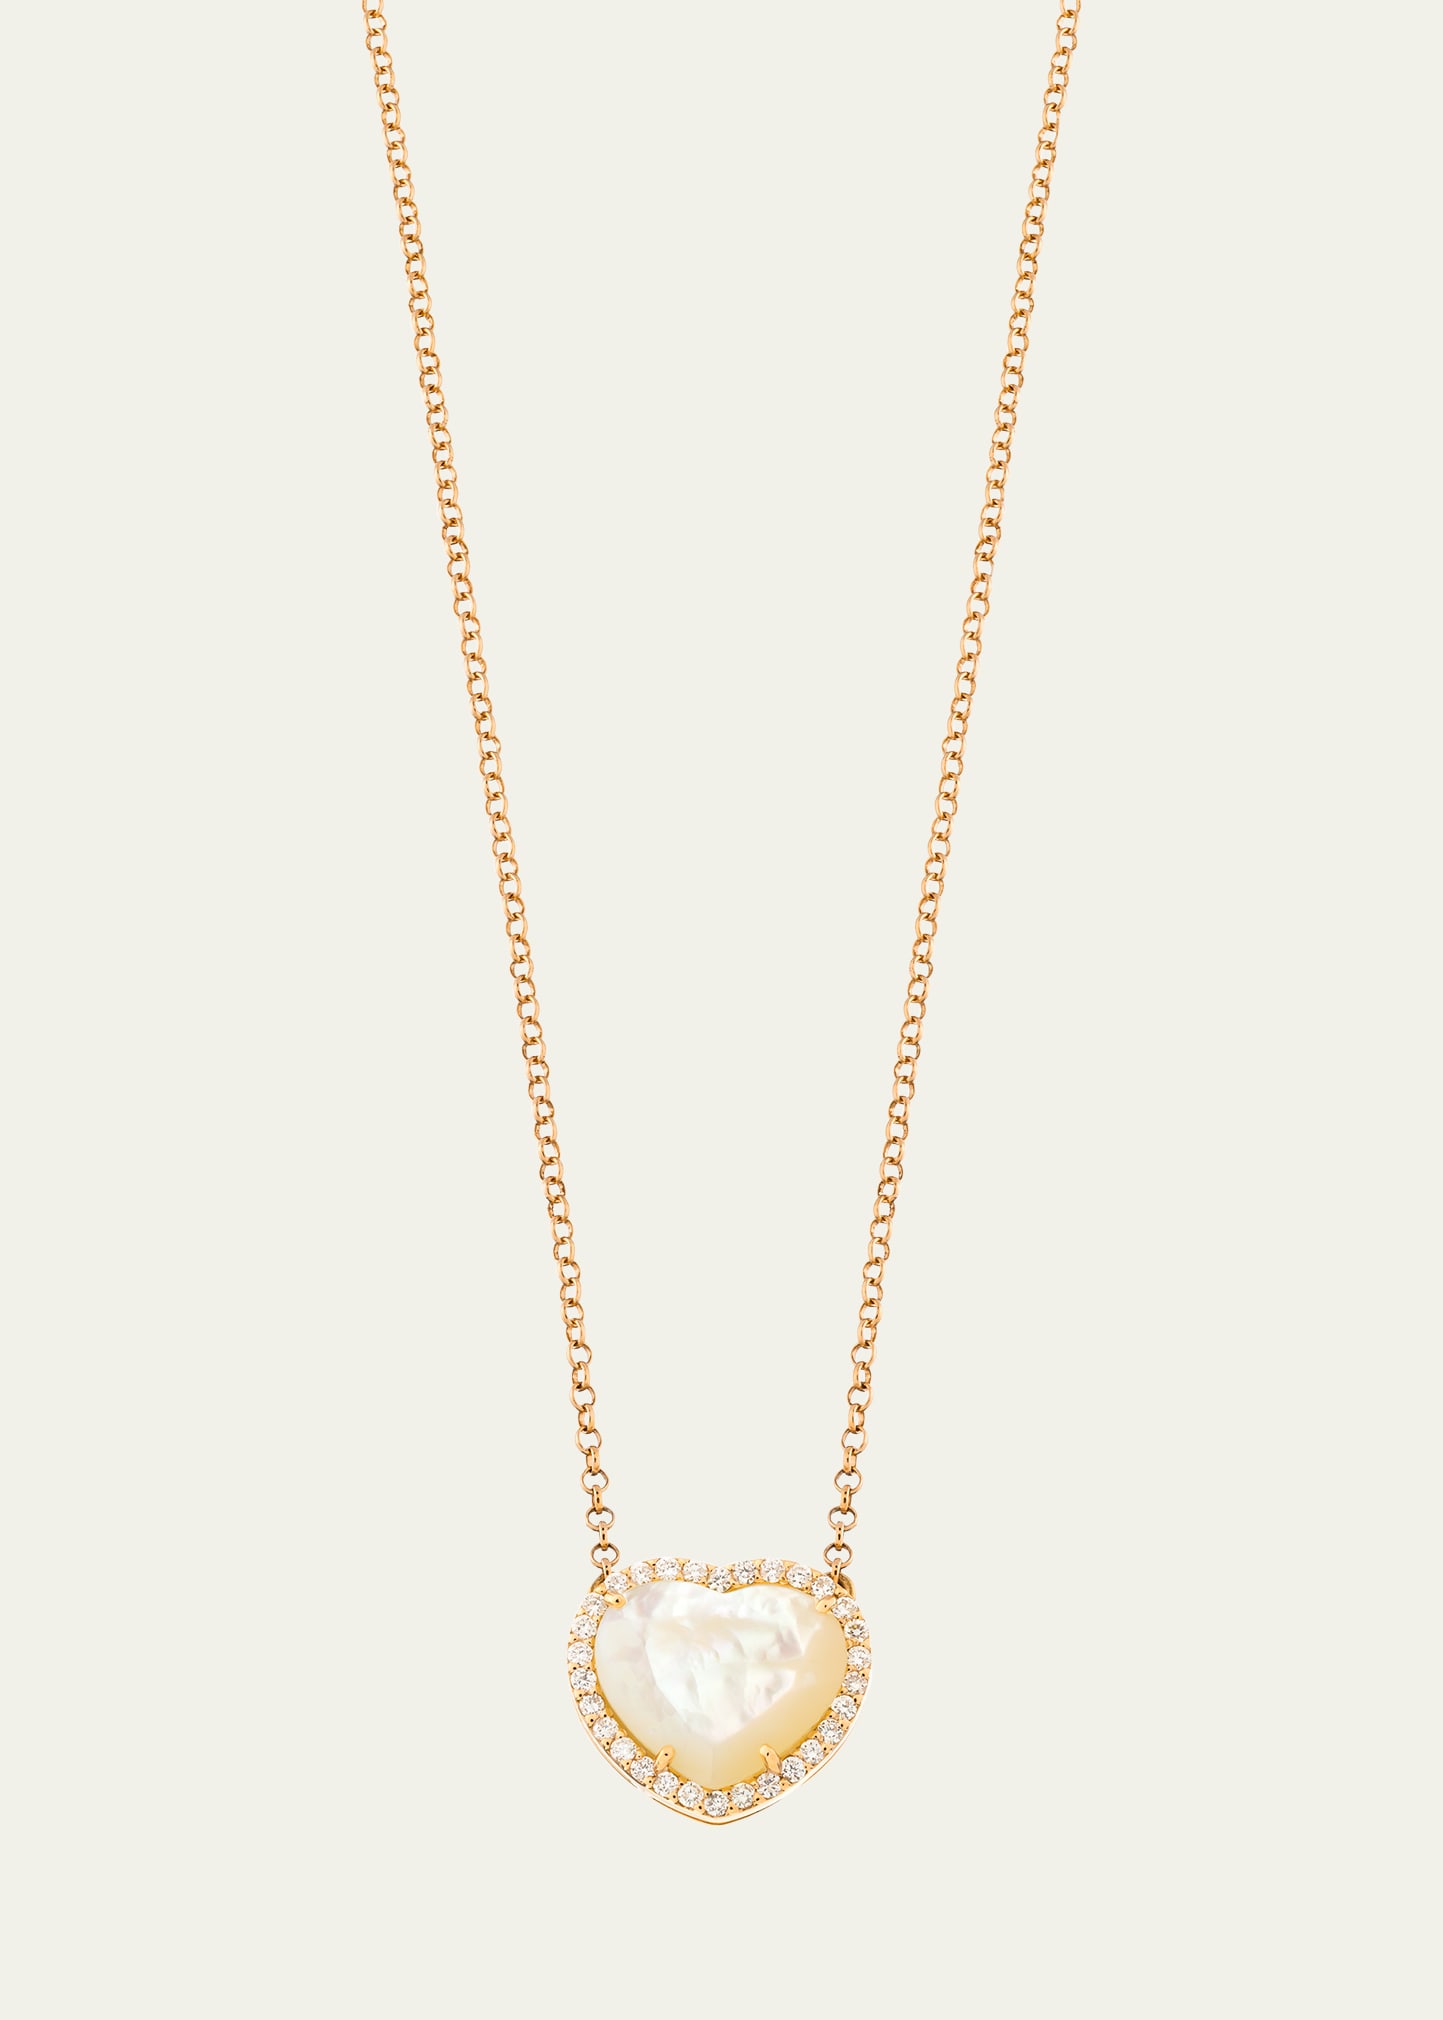 Daniella Kronfle 18k Rose Gold Medium Heart Necklace With Mother Of Pearl And Diamonds In Gray